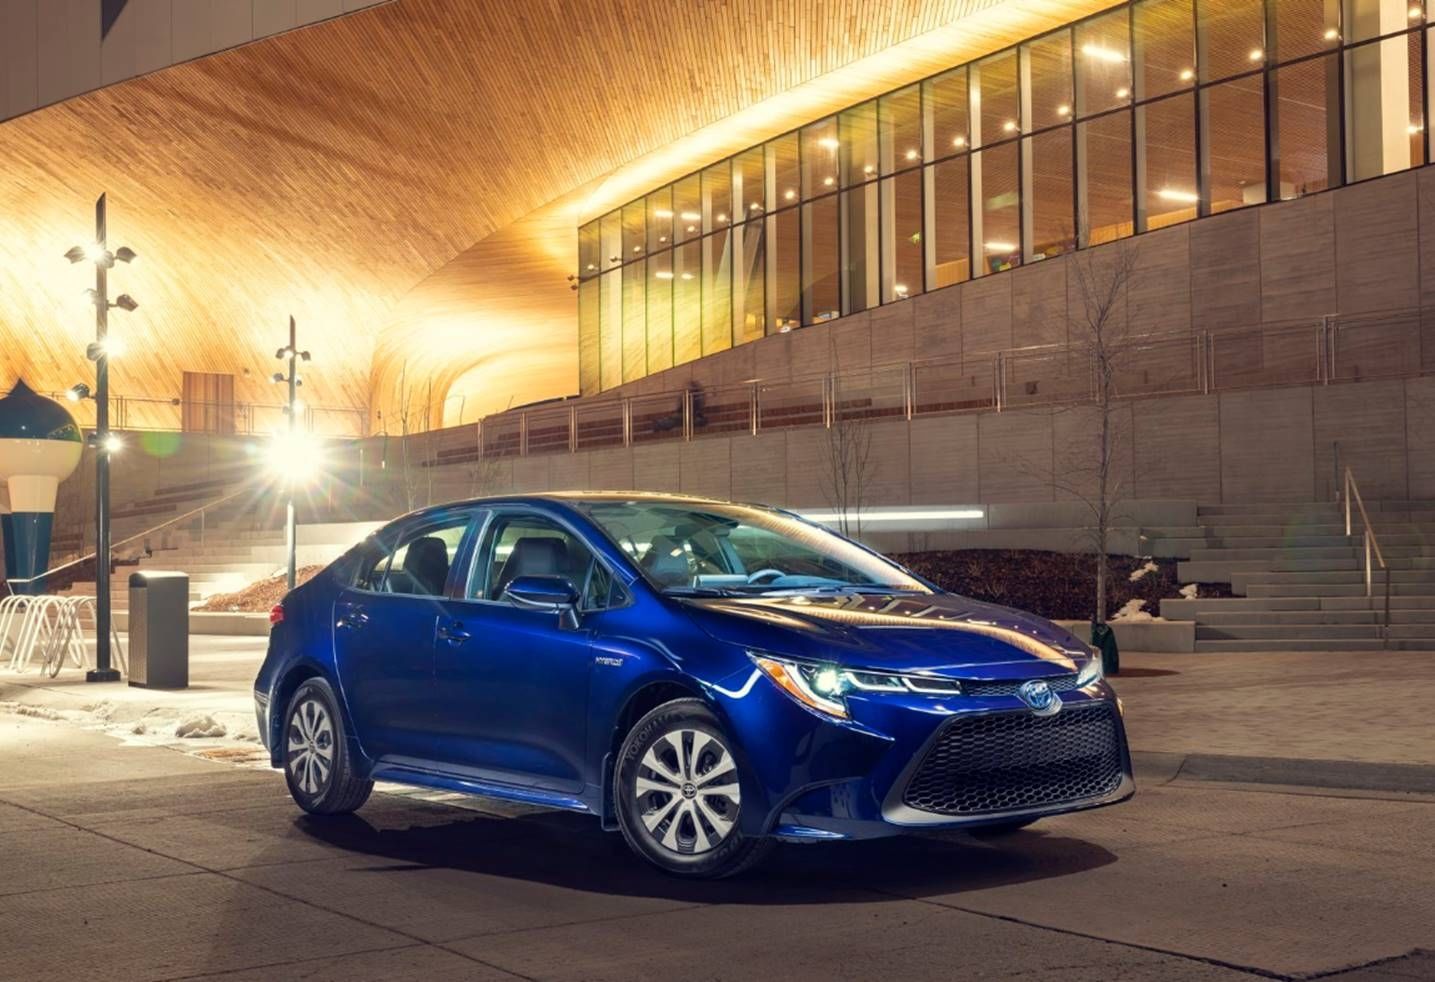 2021 Toyota Corolla Hybrid: Prices and Specifications